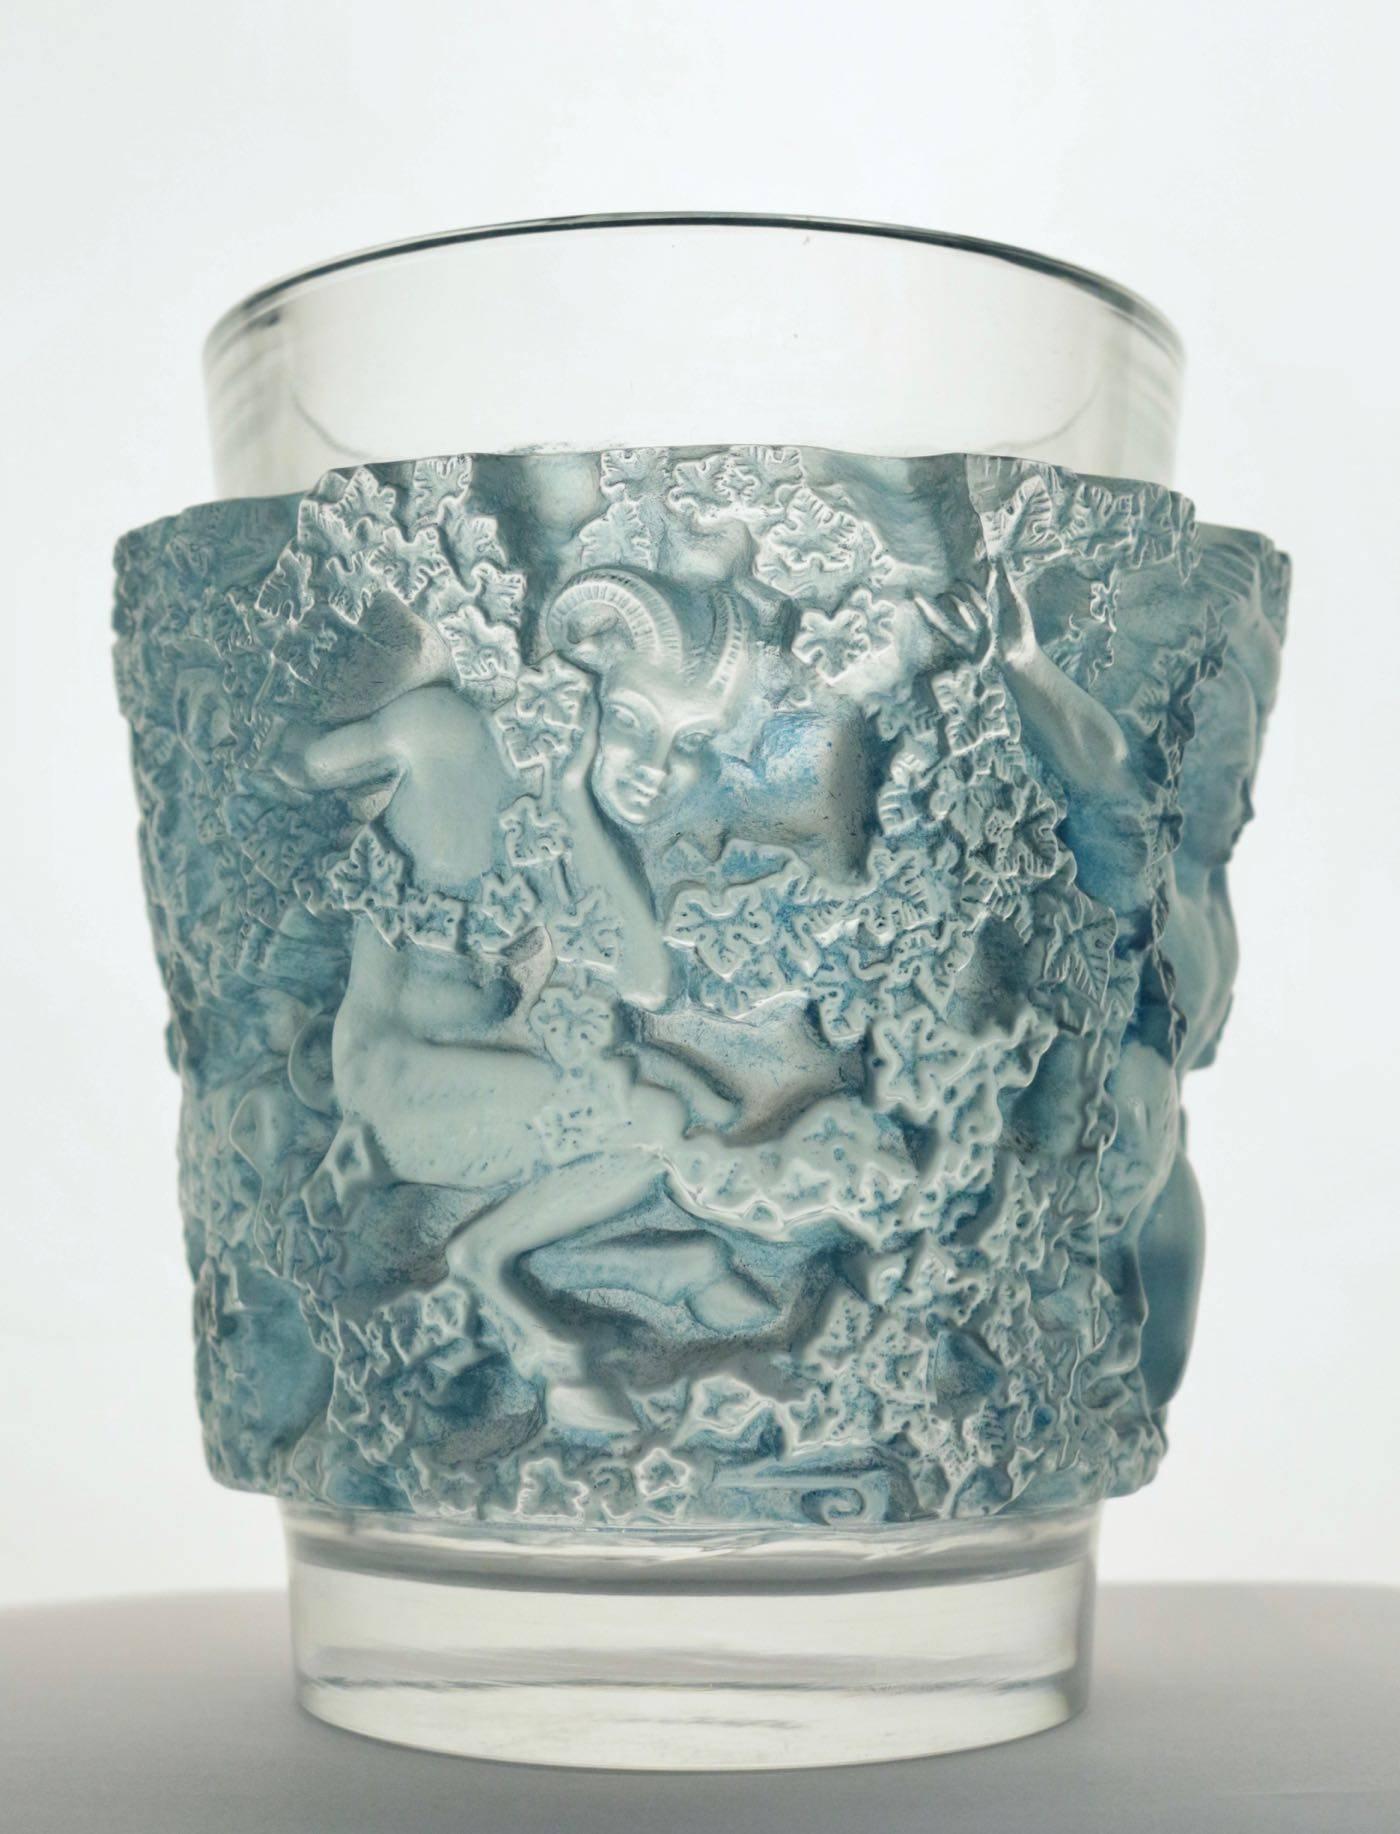 'Bacchus' a Lalique clear and frosted glass vase
No. 10-922, designed 1938, signed R. Lalique, France.
Moulded with fauns and trailing ivy, heightened in blue
Measures: 7 in. (18 cm.) high
pan style figural motif.